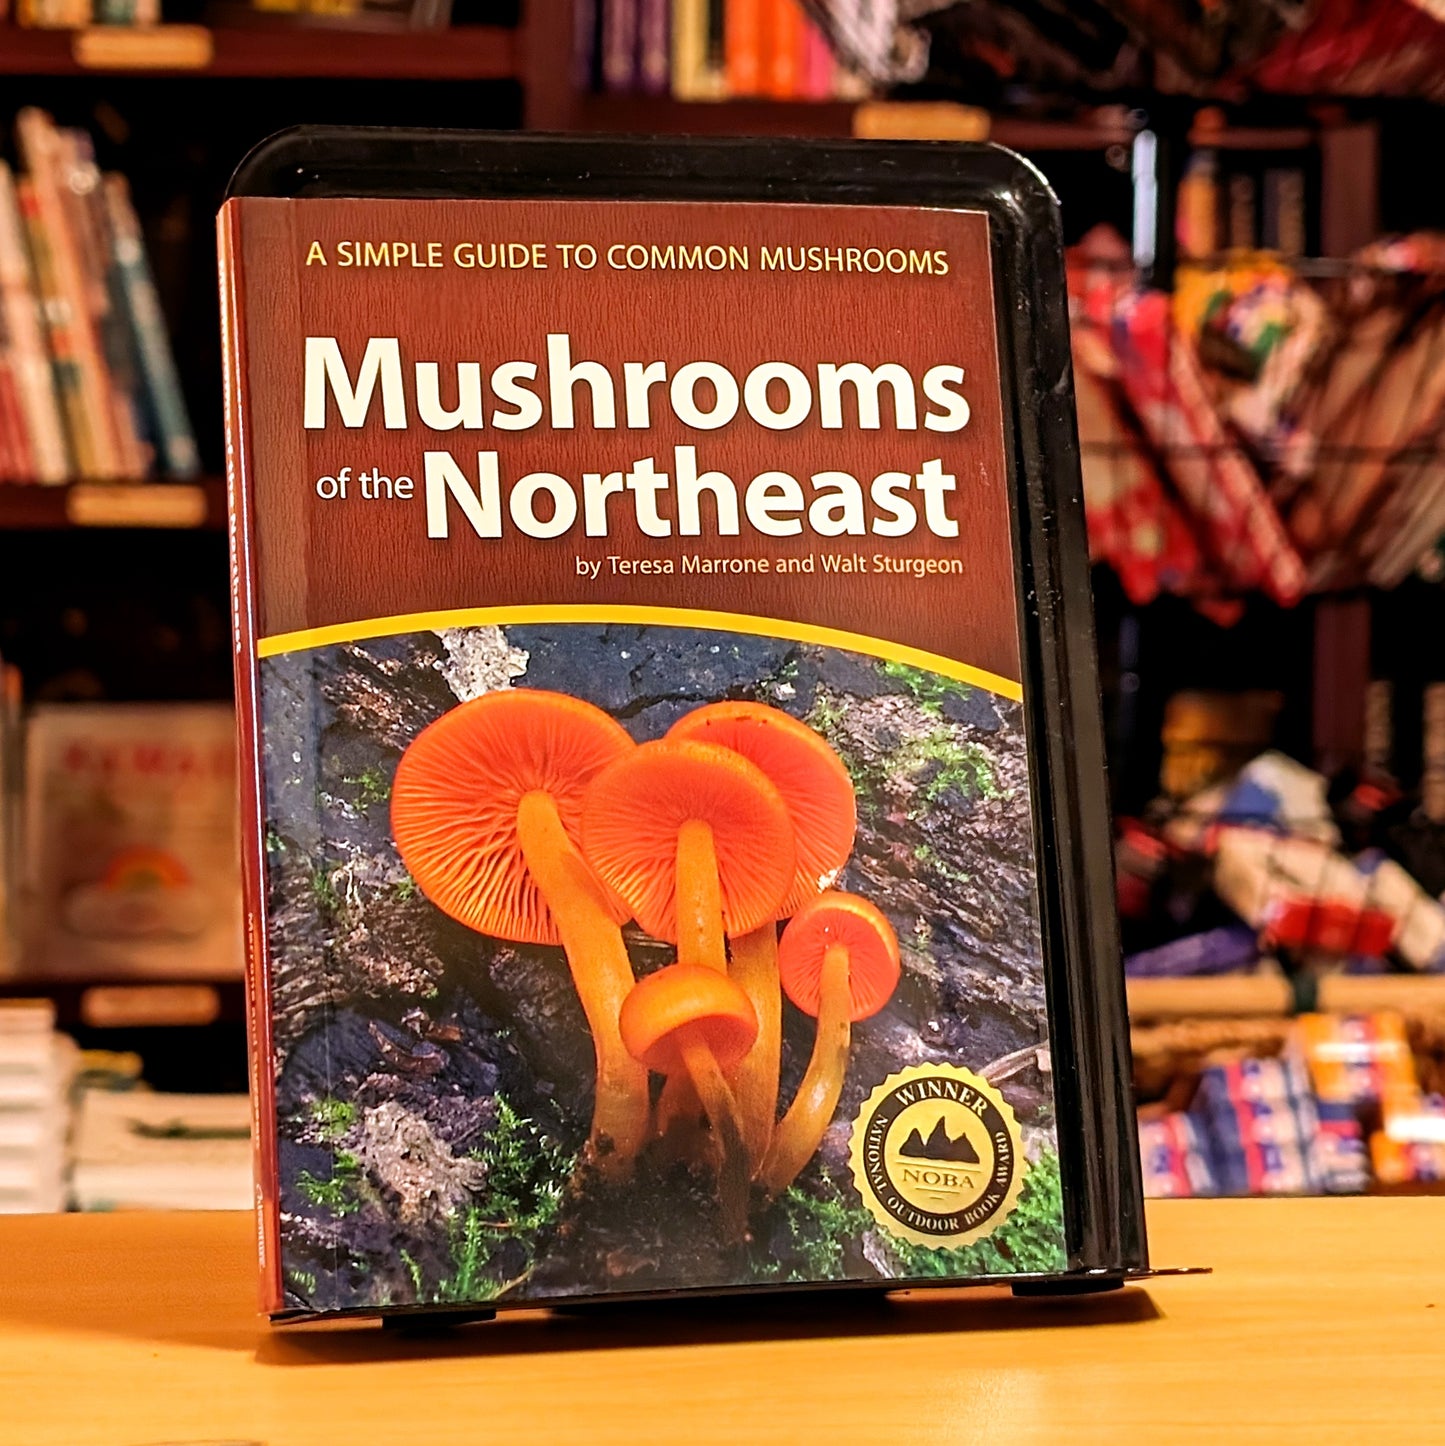 Mushrooms of the Northeast: A Simple Guide to Common Mushrooms (Mushroom Guides)